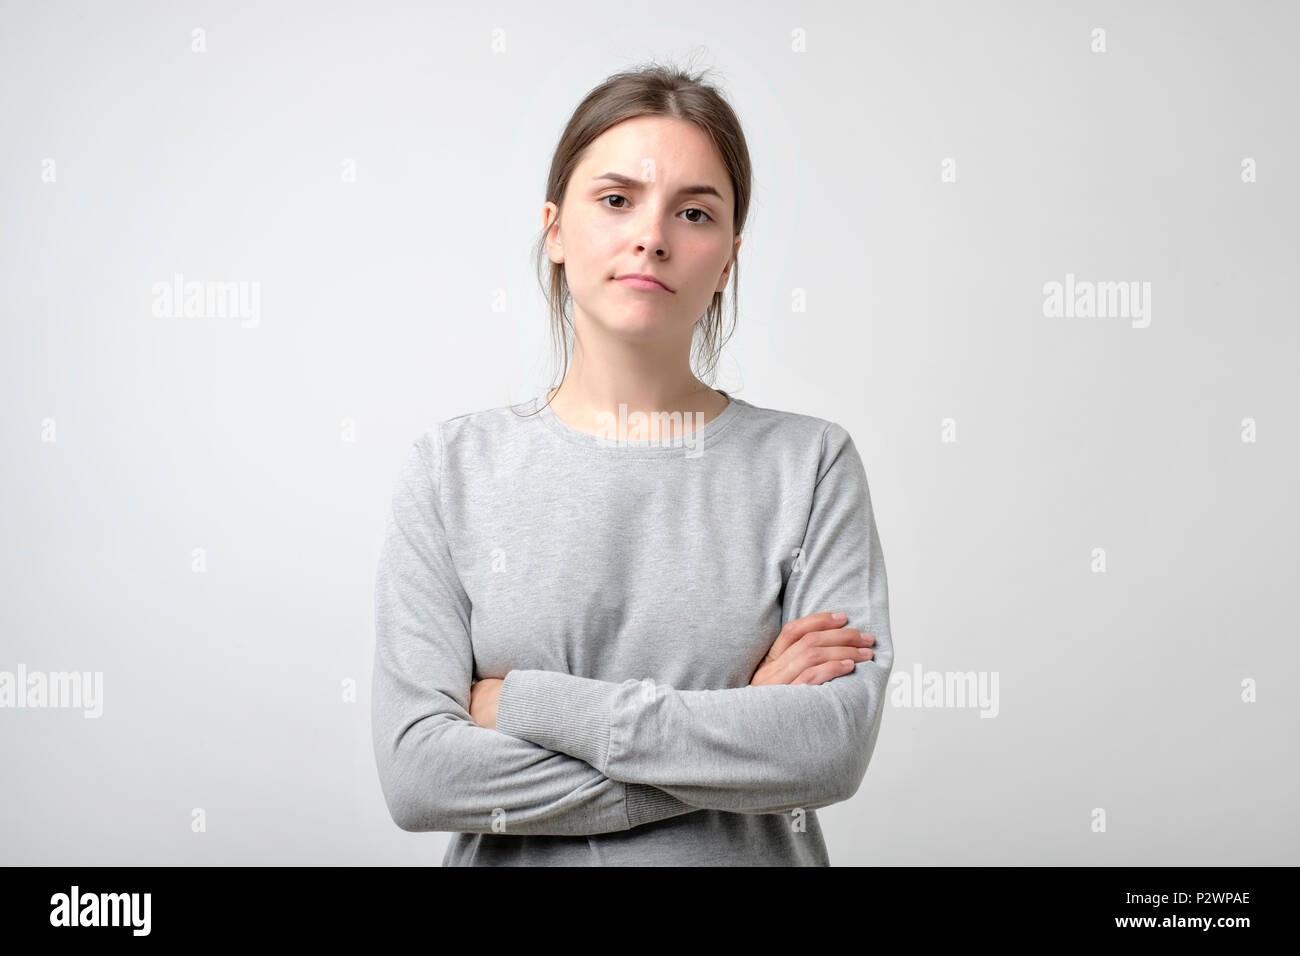 Disappointment, confusion, bad mood. Frustrated young woman with crossed hands stands isolated on white. Stock Photo